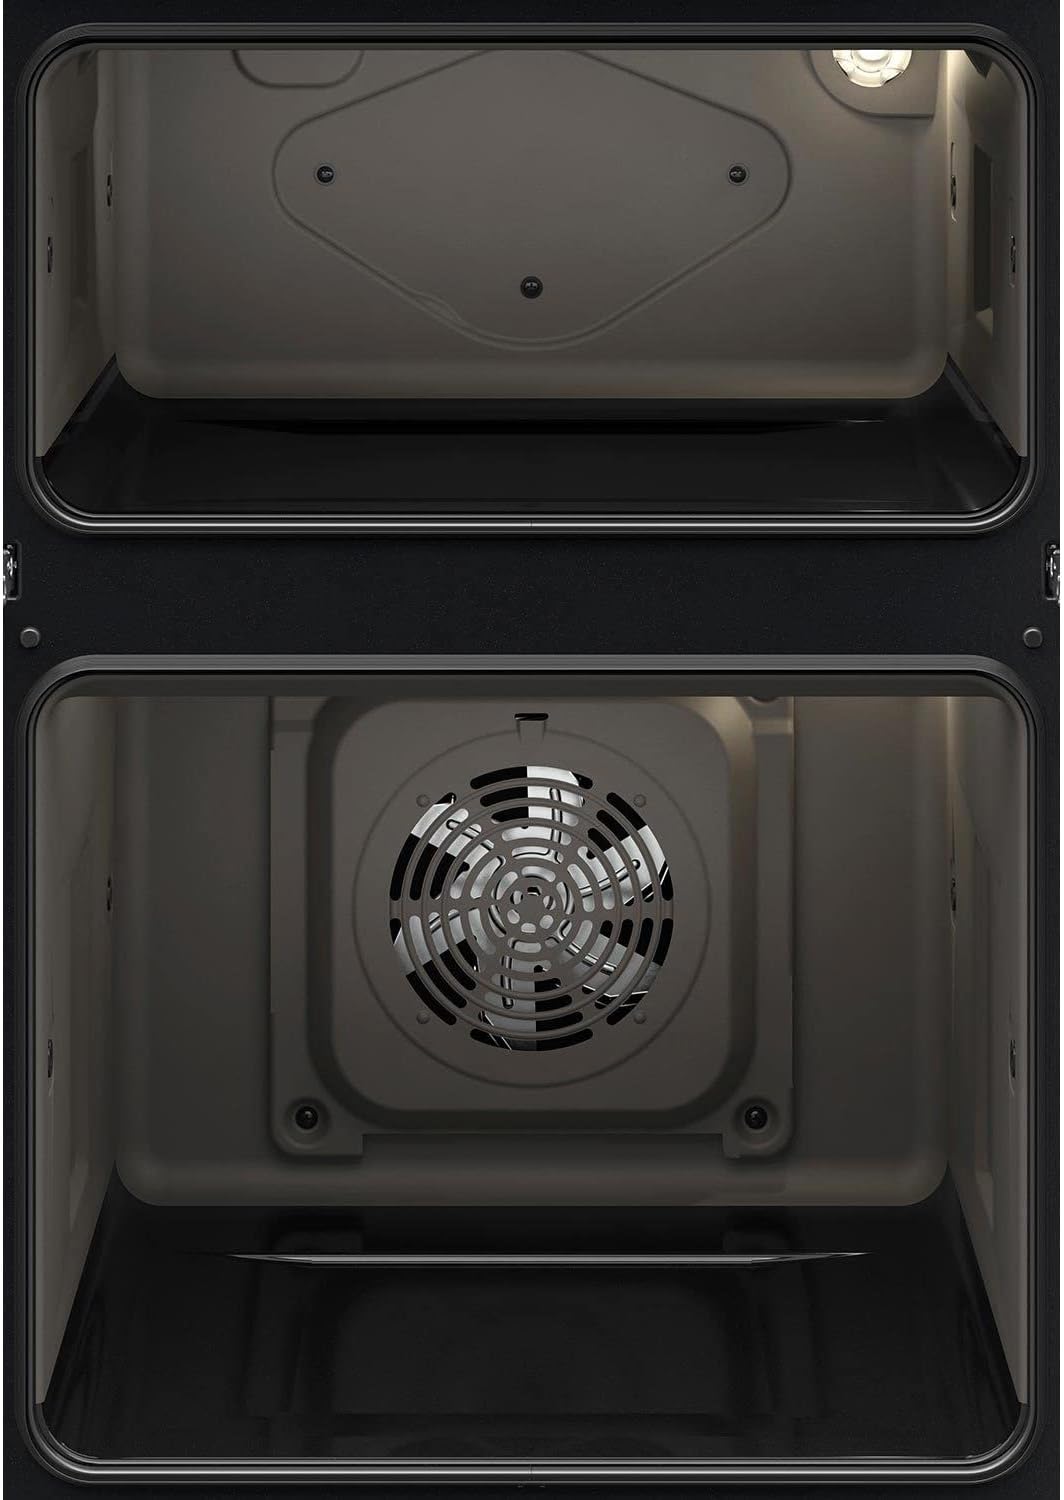 Zanussi Series 40 Airfry Built - in Double Oven With Catalytic Cleaning - Stainless Steel - Amazing Gadgets Outlet